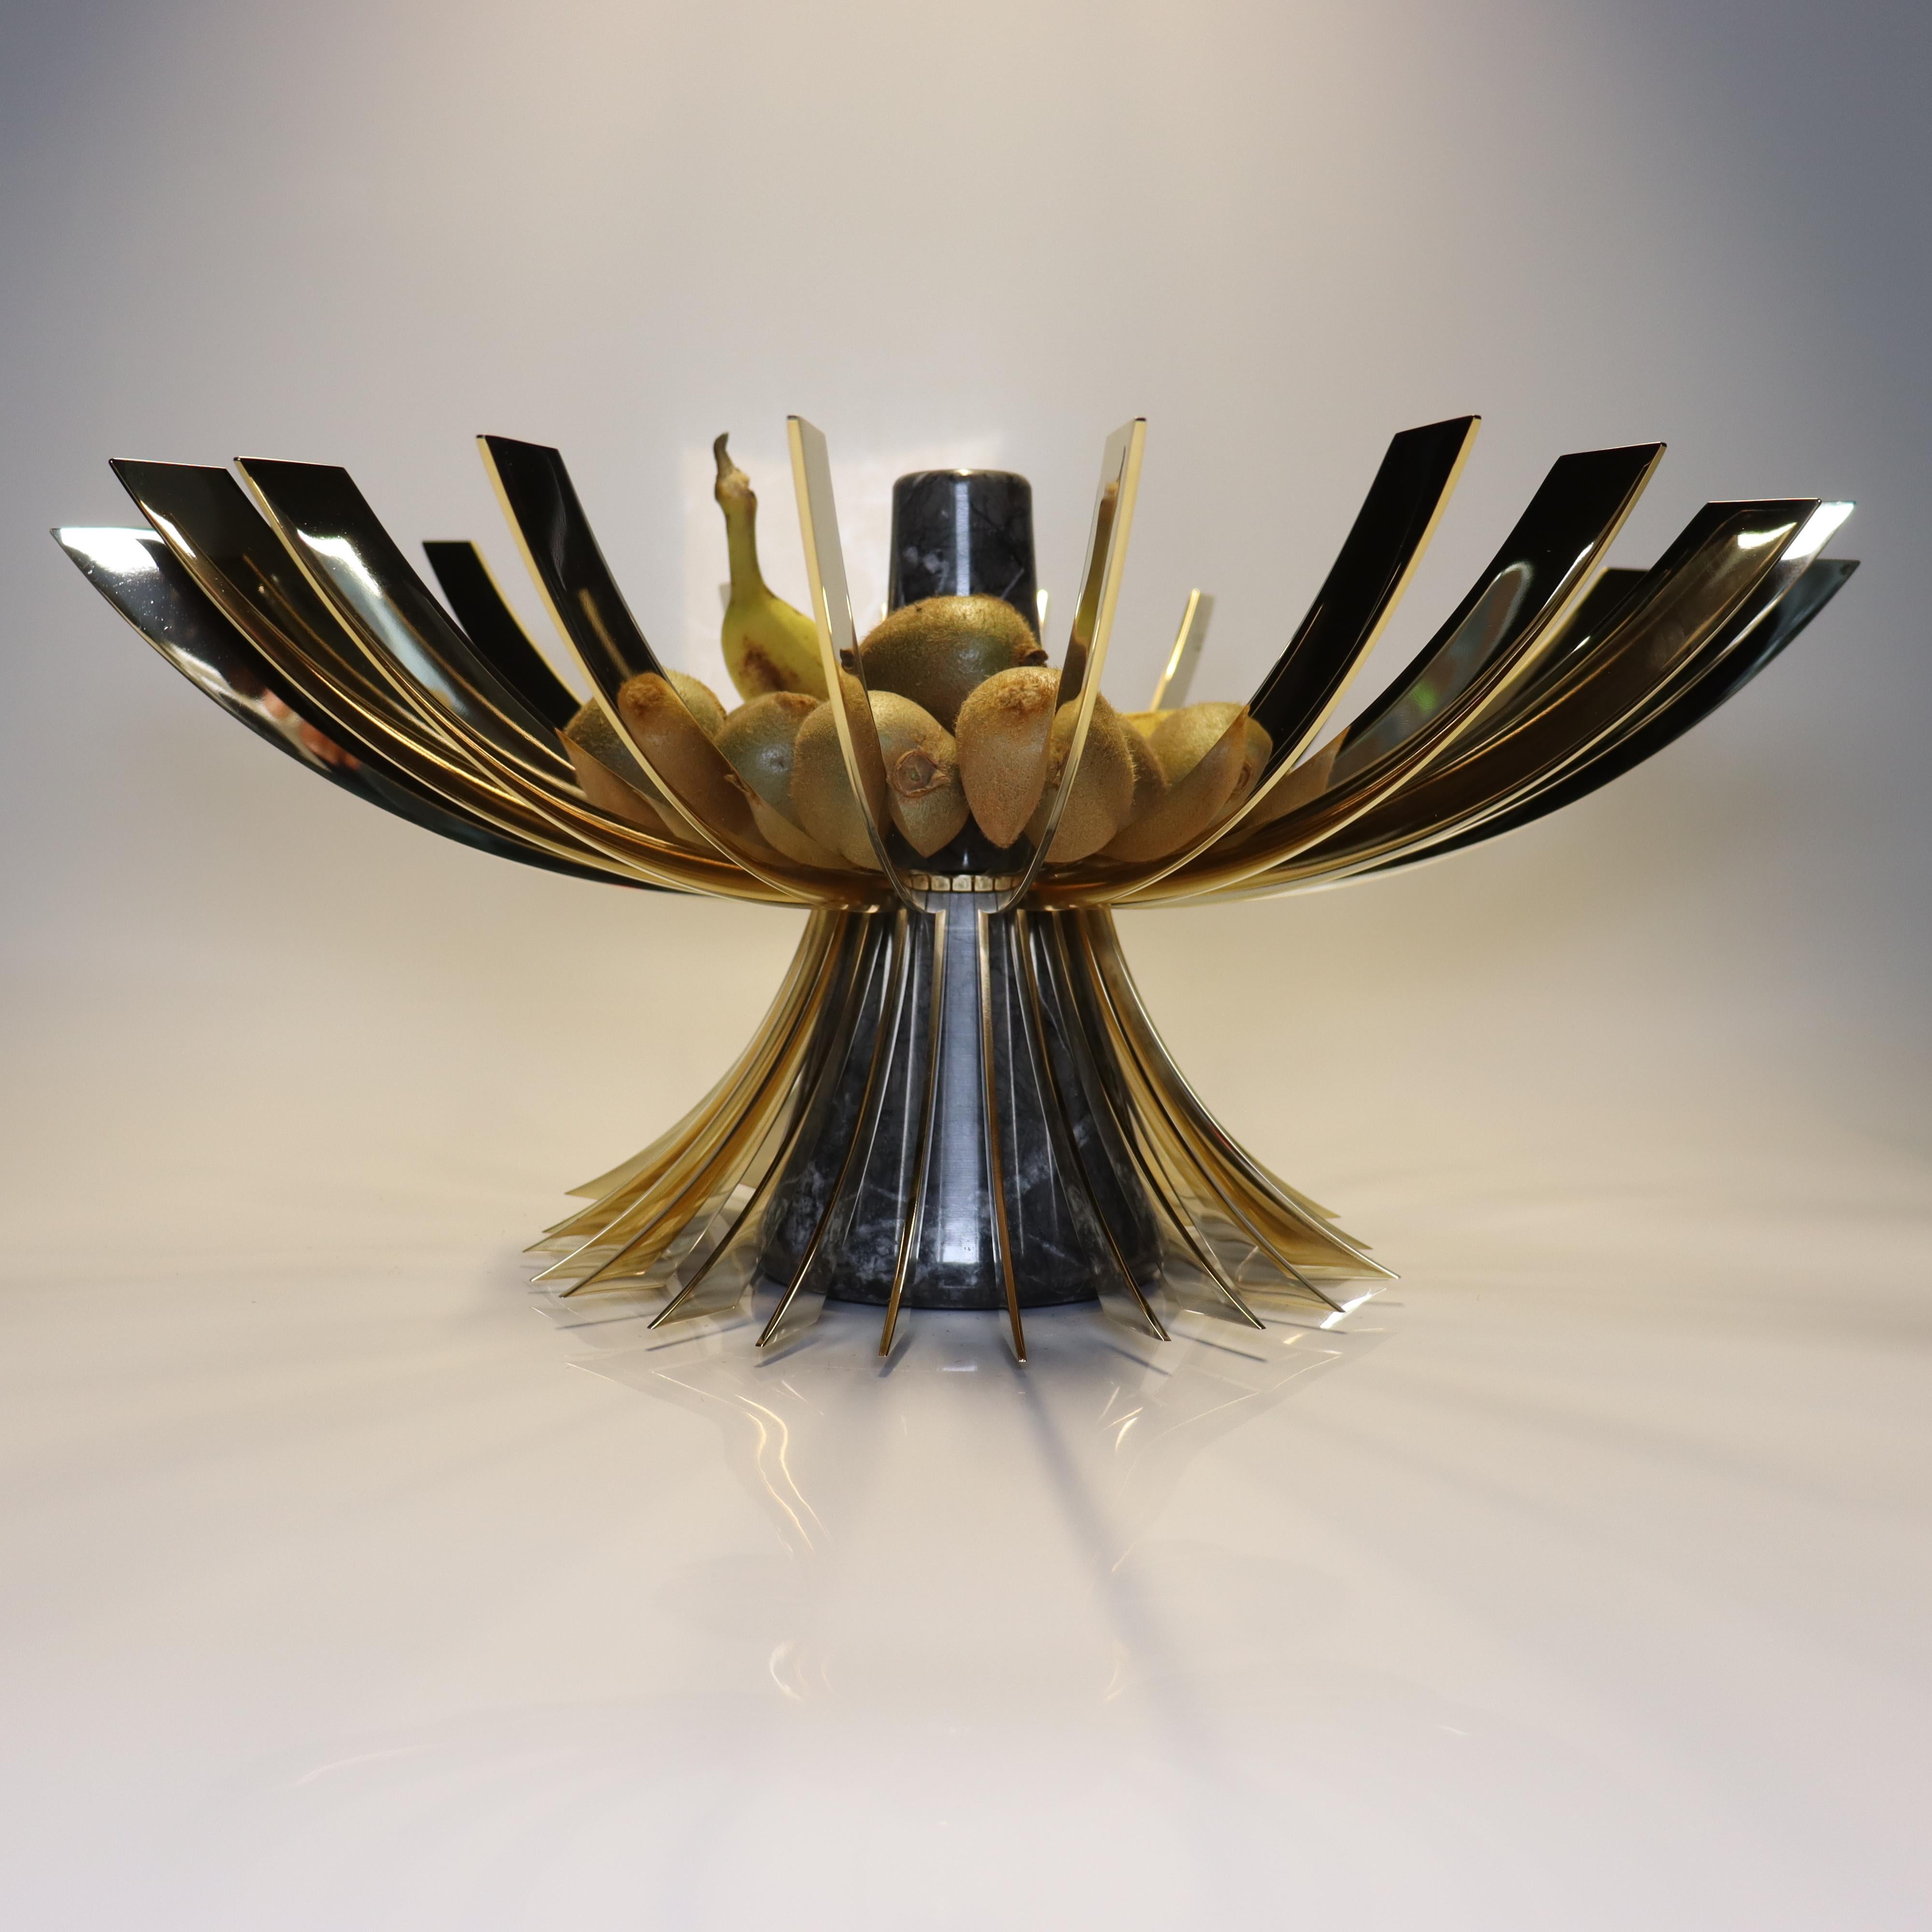 Contemporary 2K1M - Sagoma Fruit Bowl - Black & Gold - Marble core and Metal 24K Gold Fins. For Sale